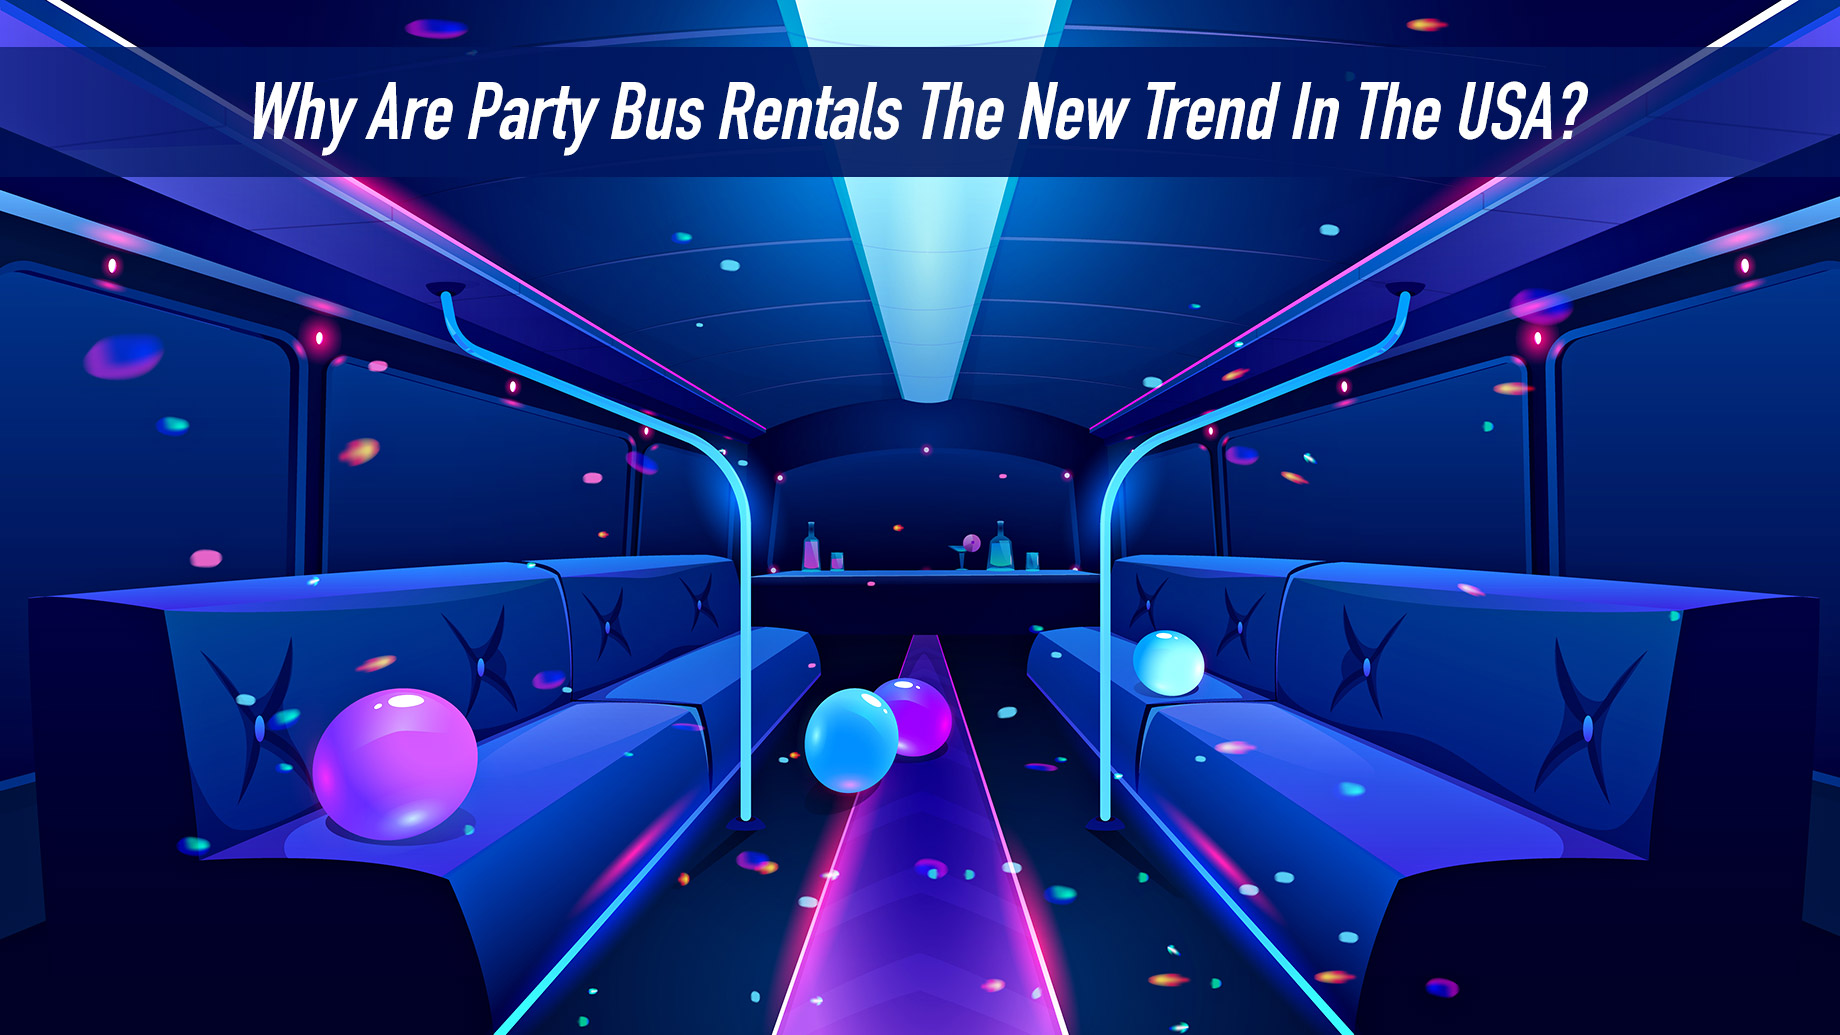 Why Are Party Bus Rentals The New Trend In The USA?